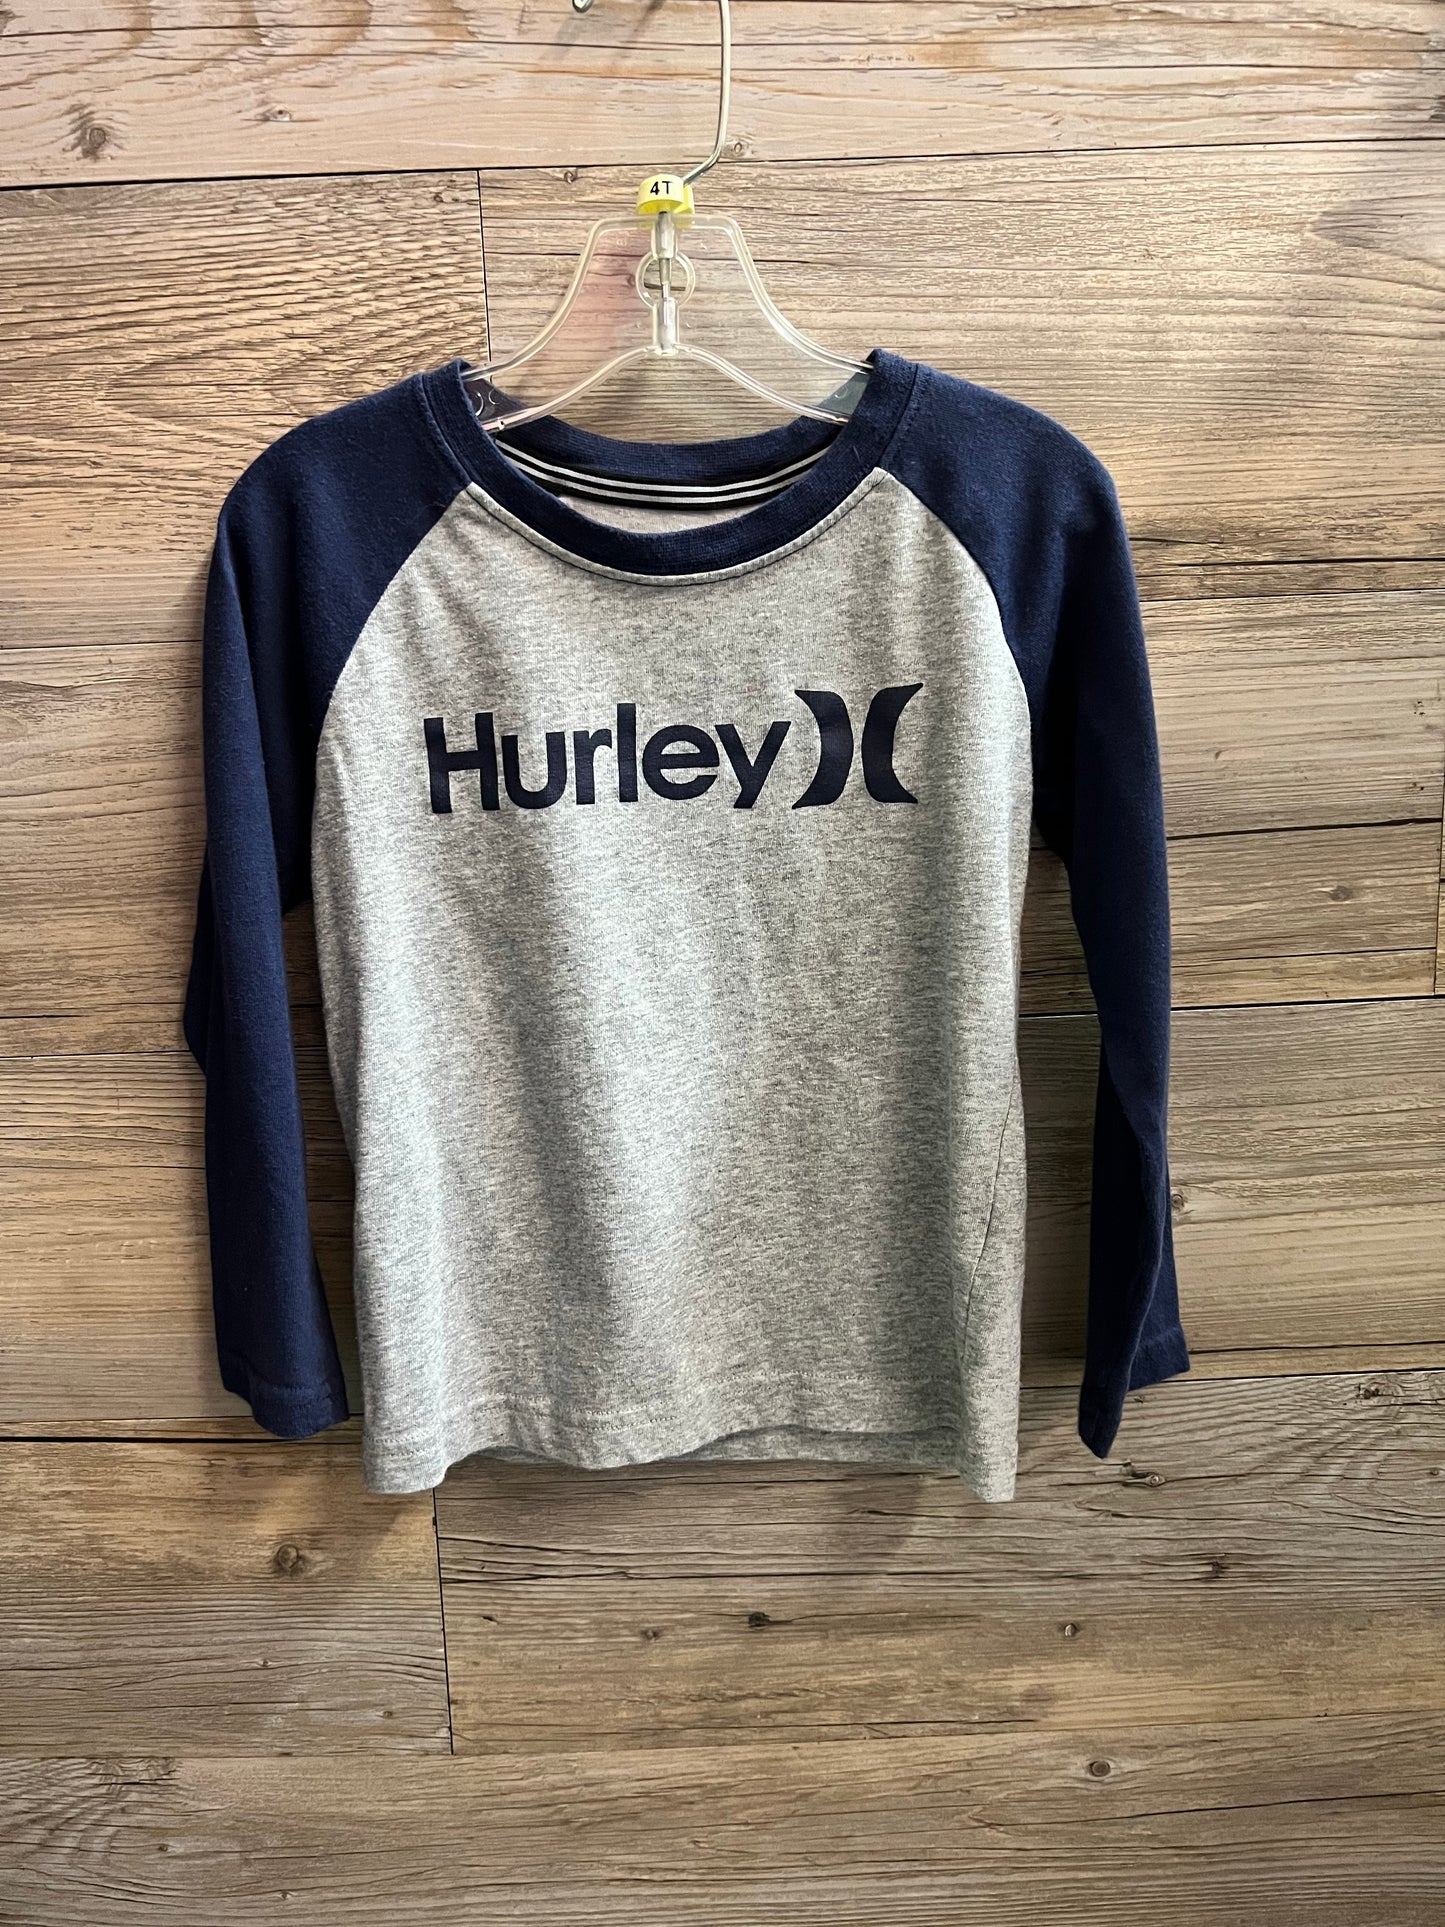 Hurley Long Sleeve, Size 4T